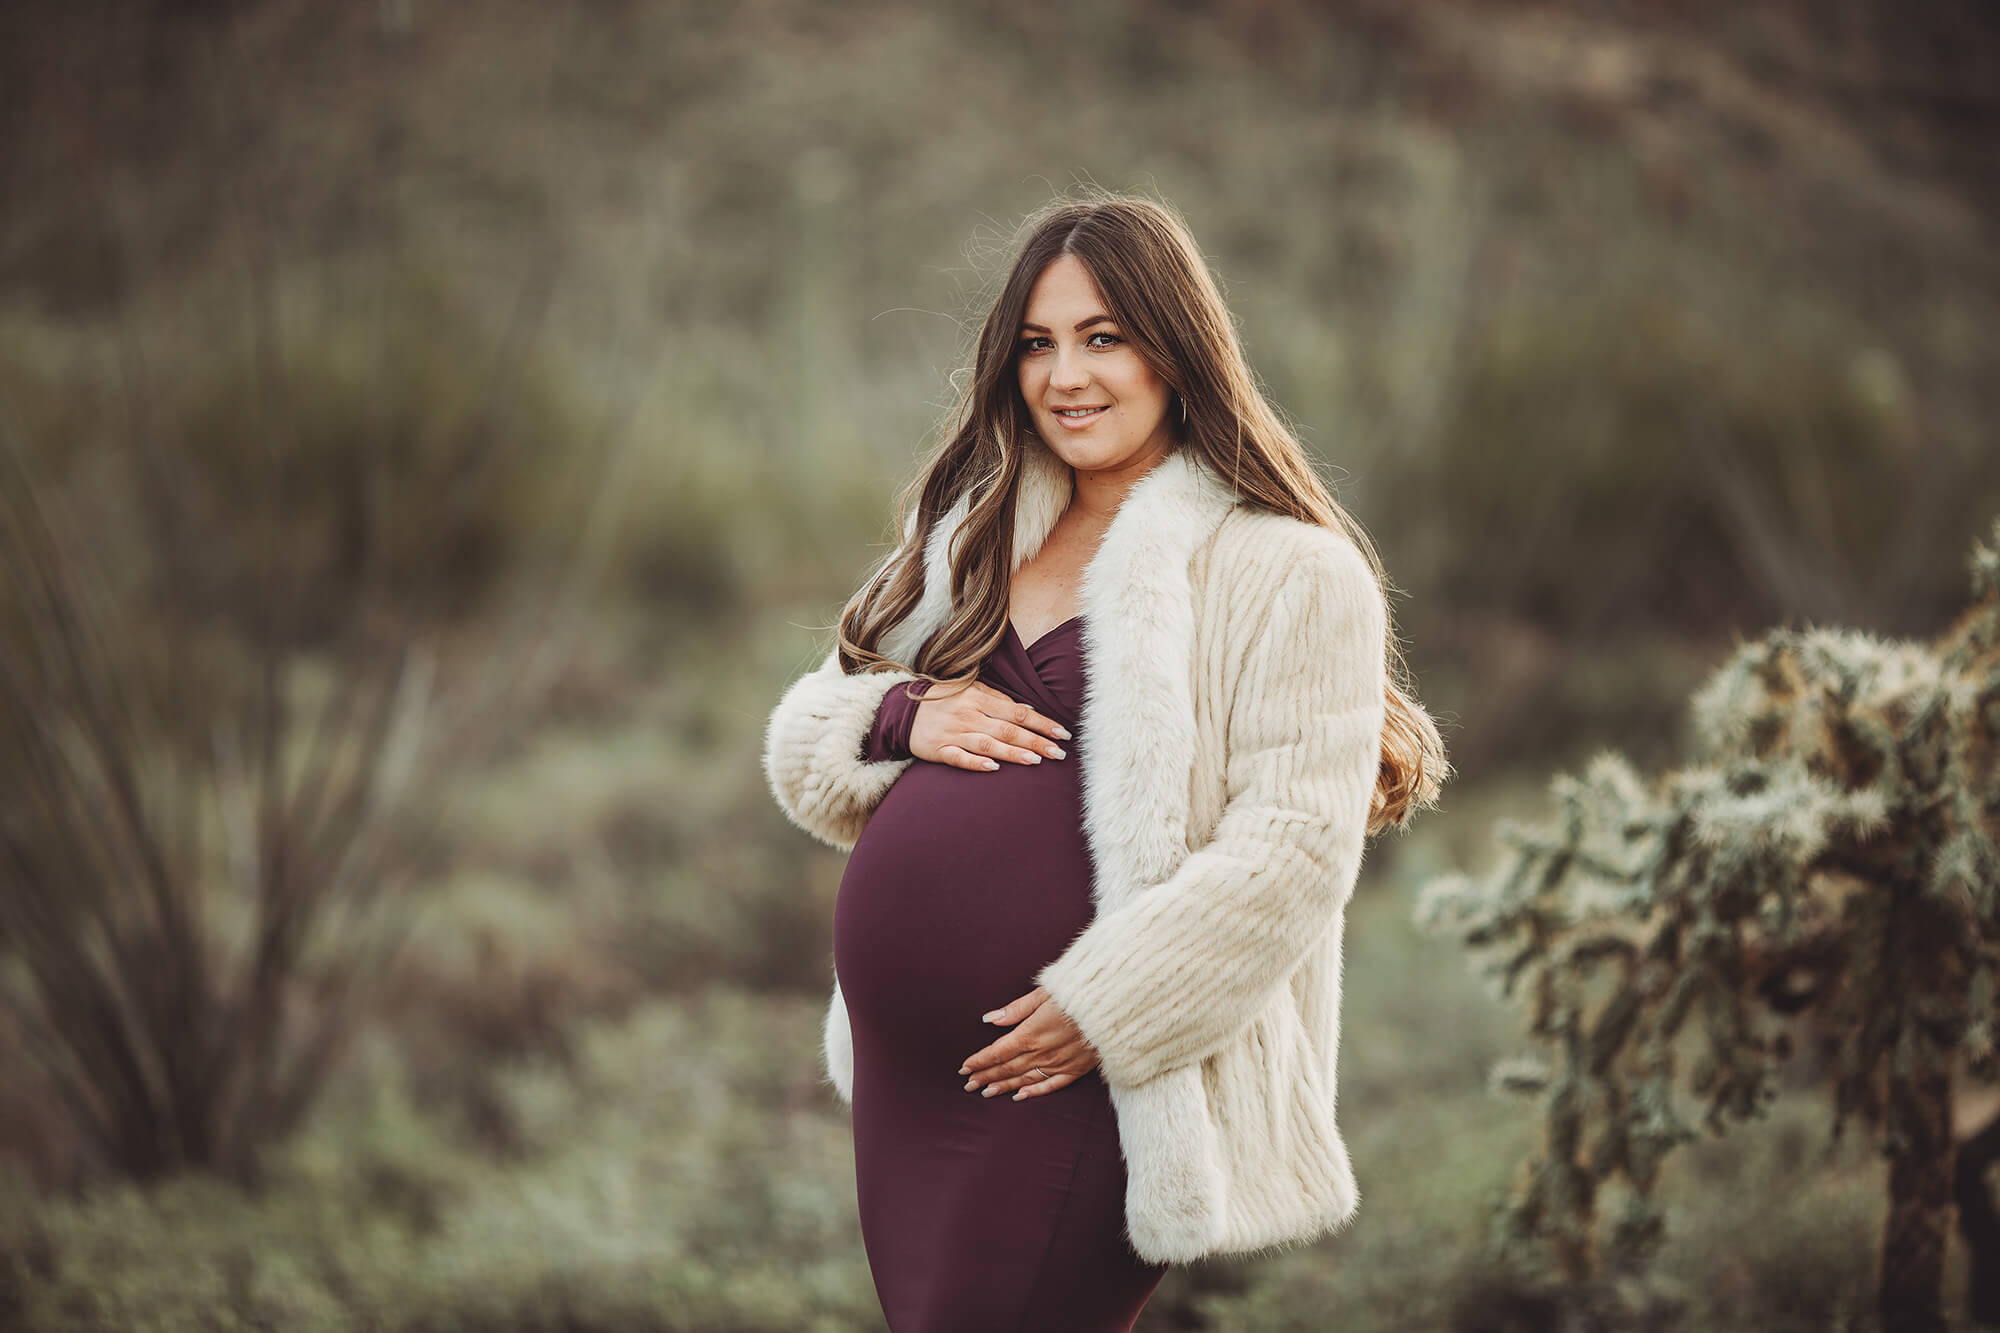 Anica with the glow of becoming an expectant momma during her maternity session with Belle Vie Photography in Tucson